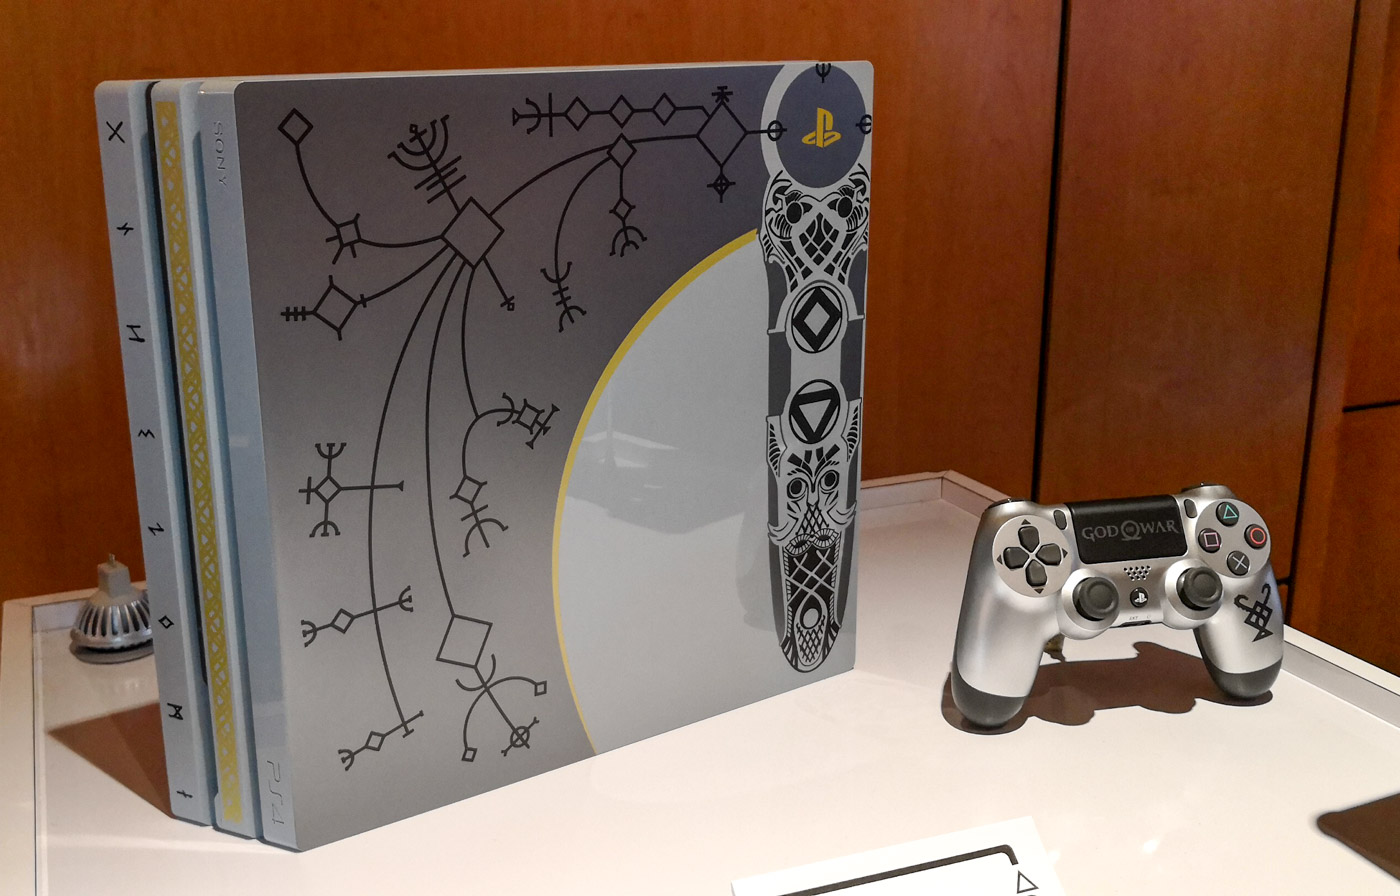 ps4 limited edition god of war